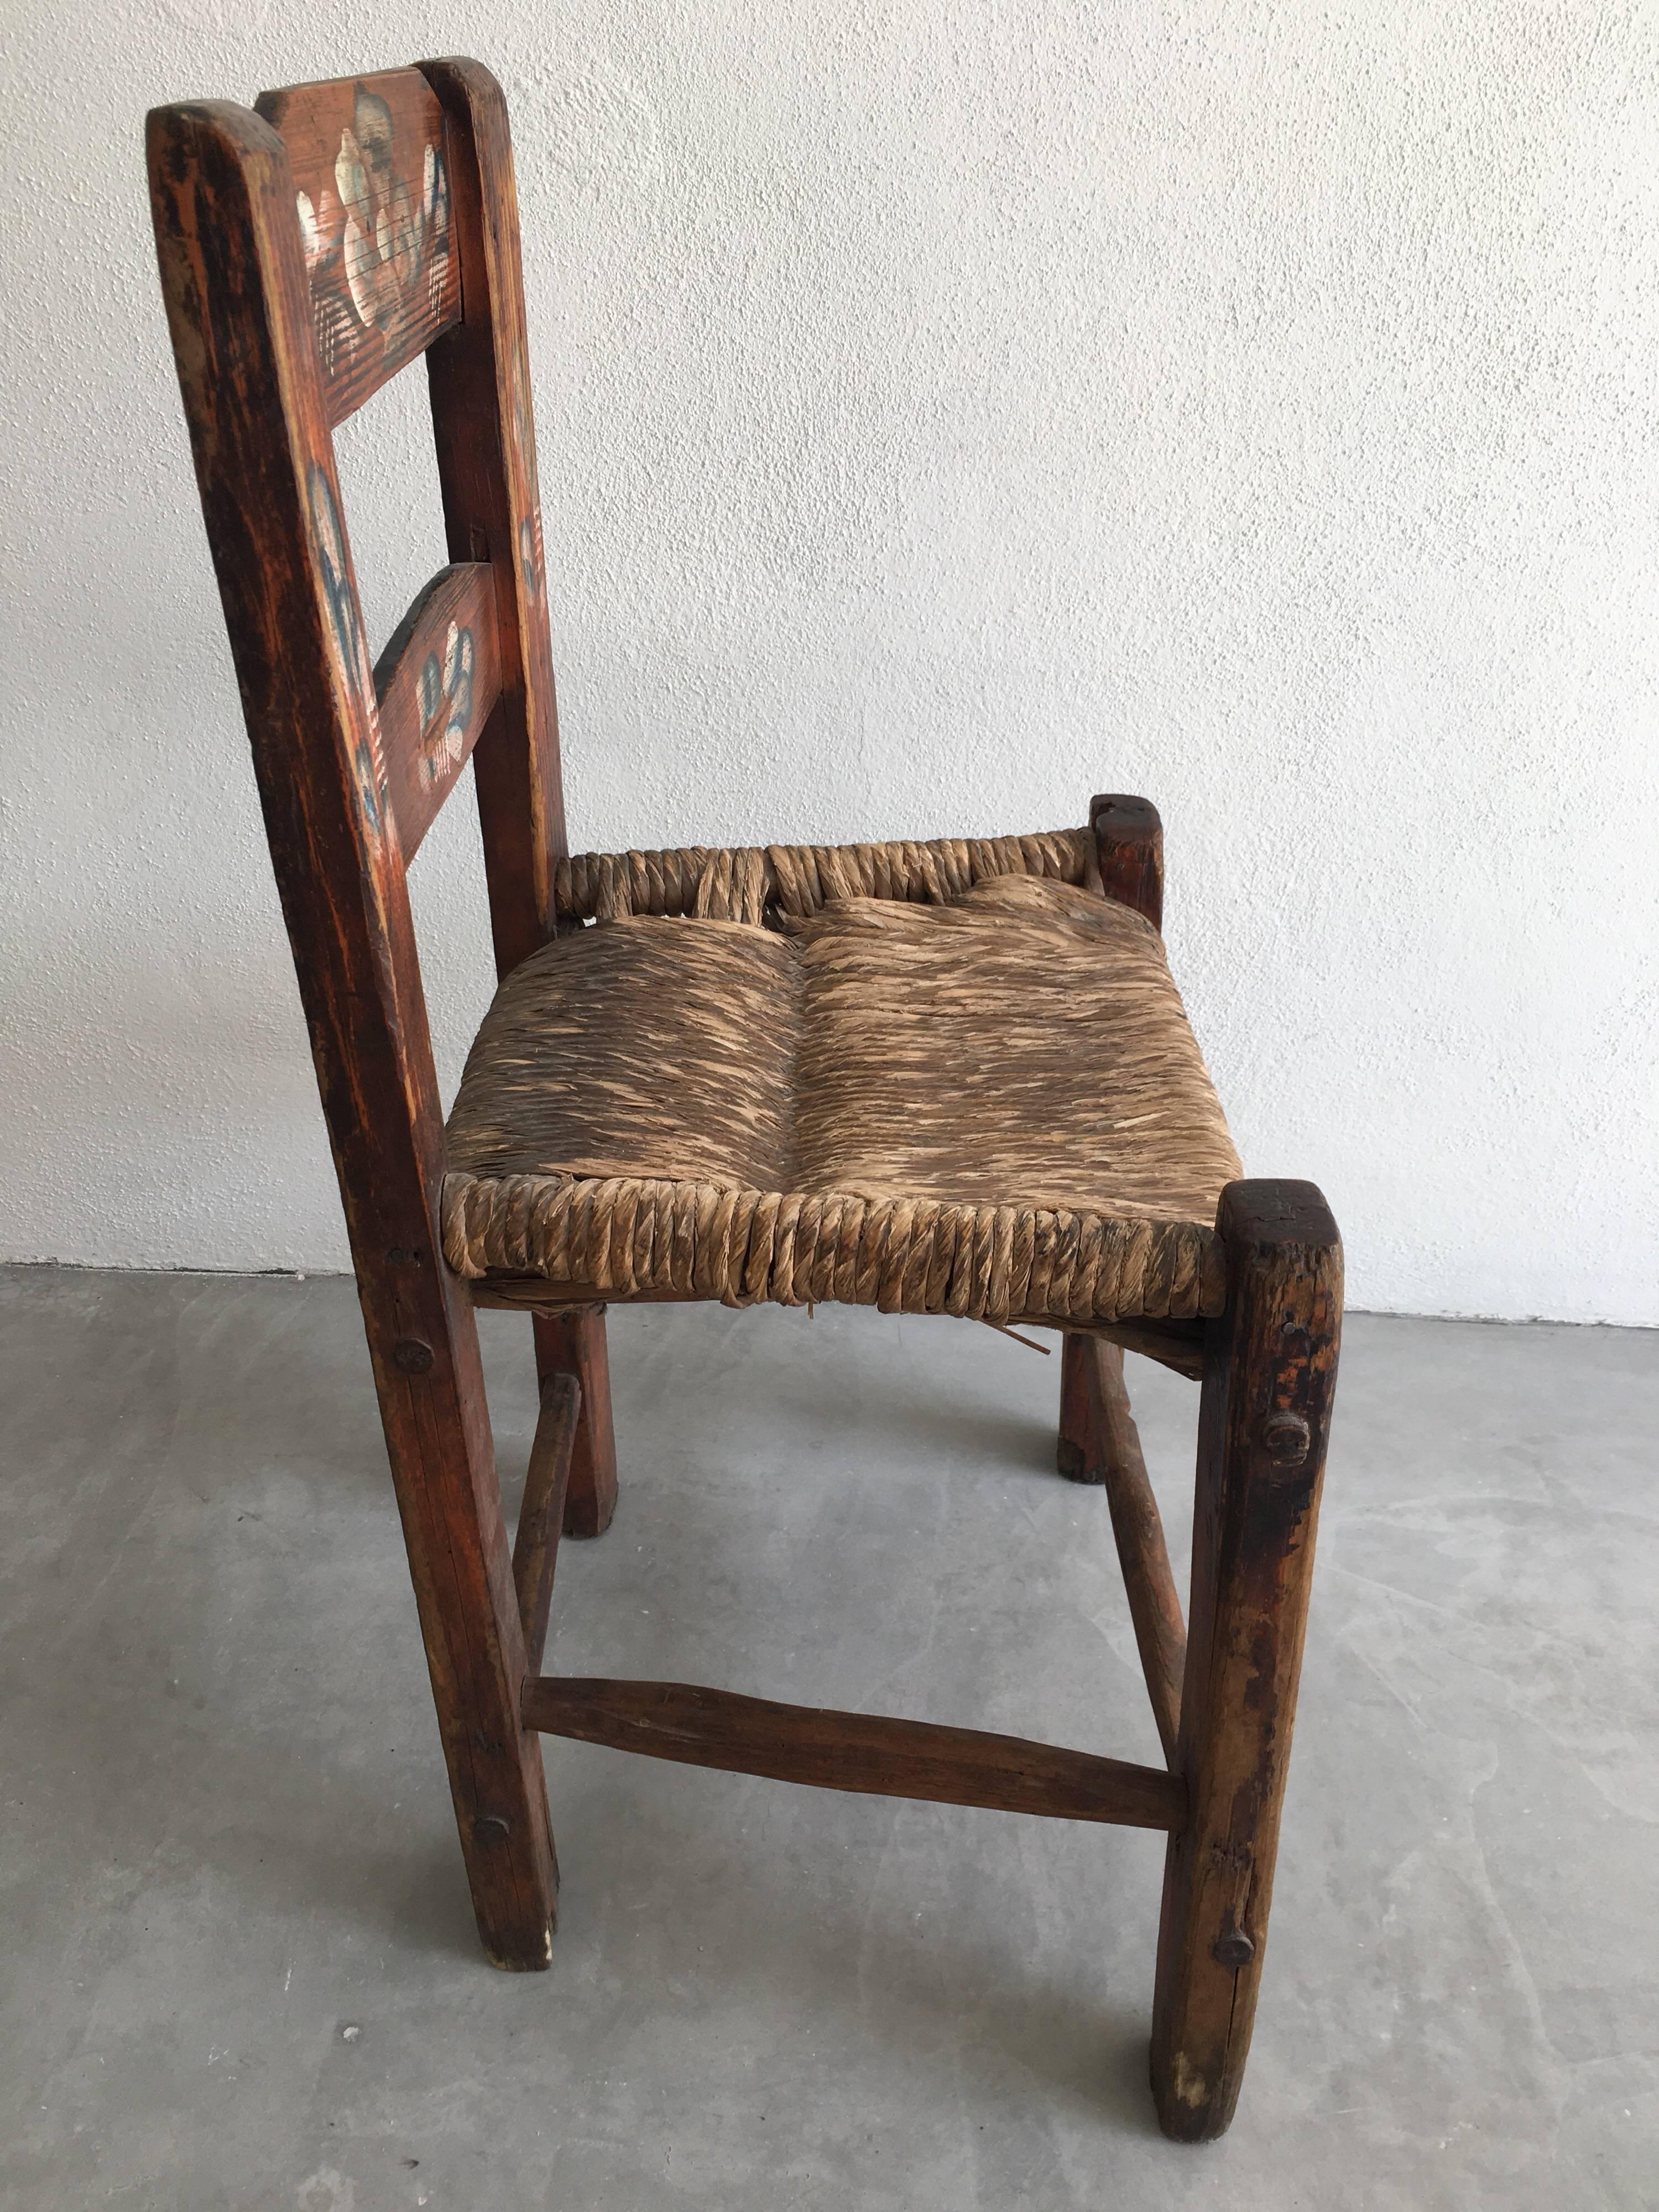 Hand-Crafted Quiroga Chairs from Mexico